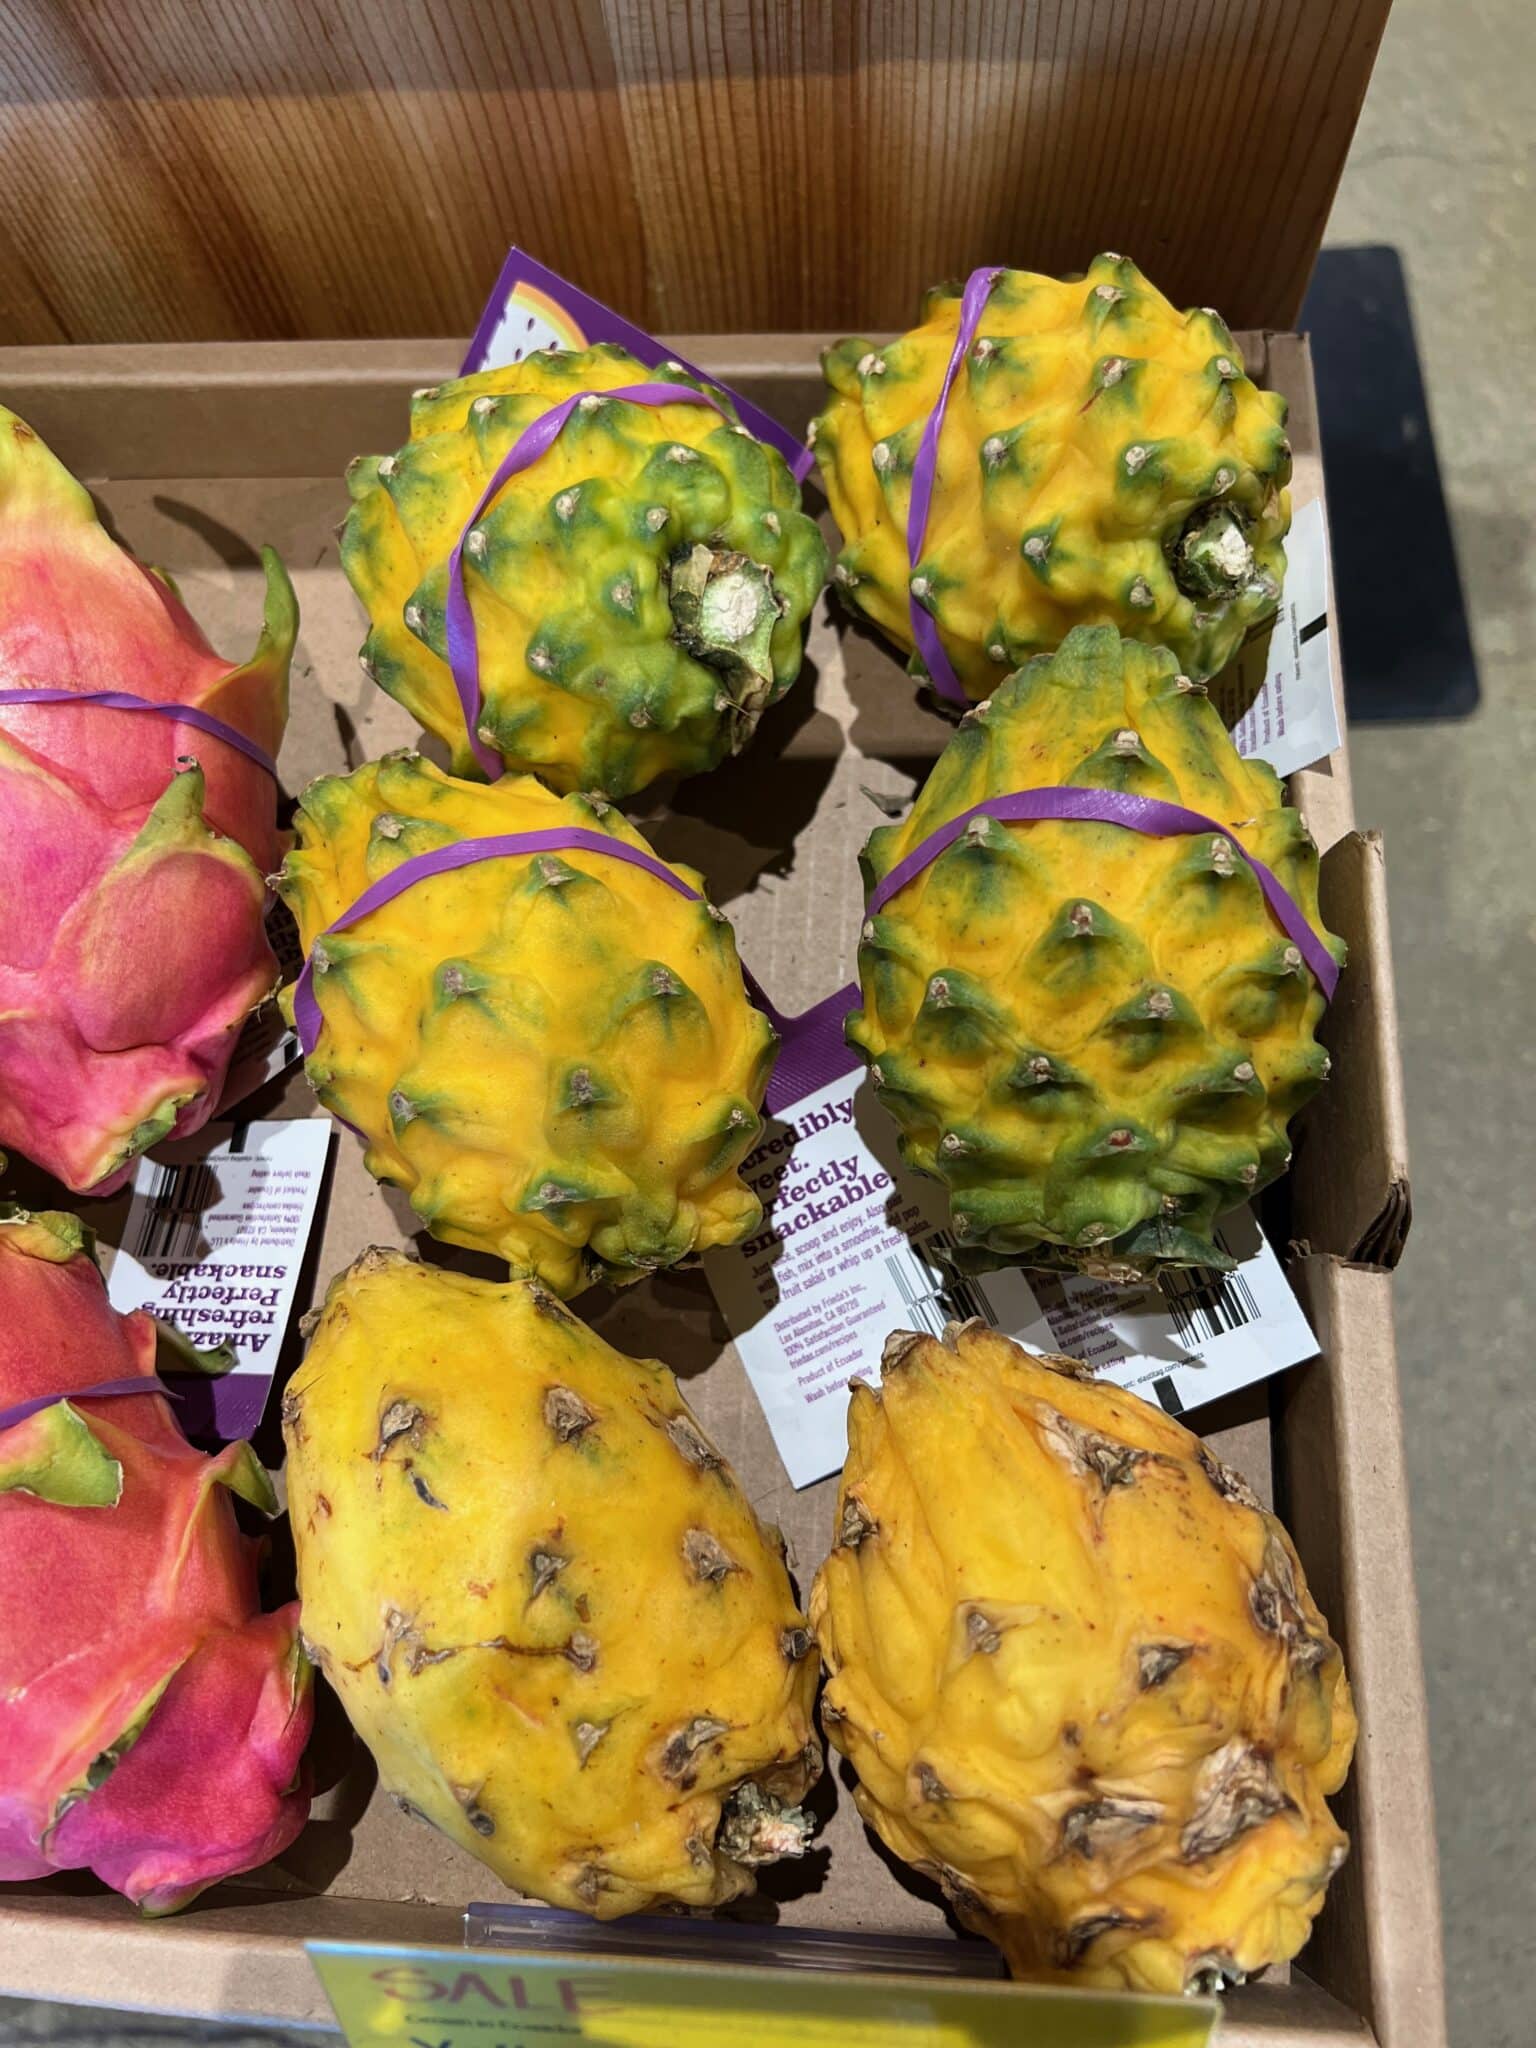 yellow dragon fruit for sale in market.